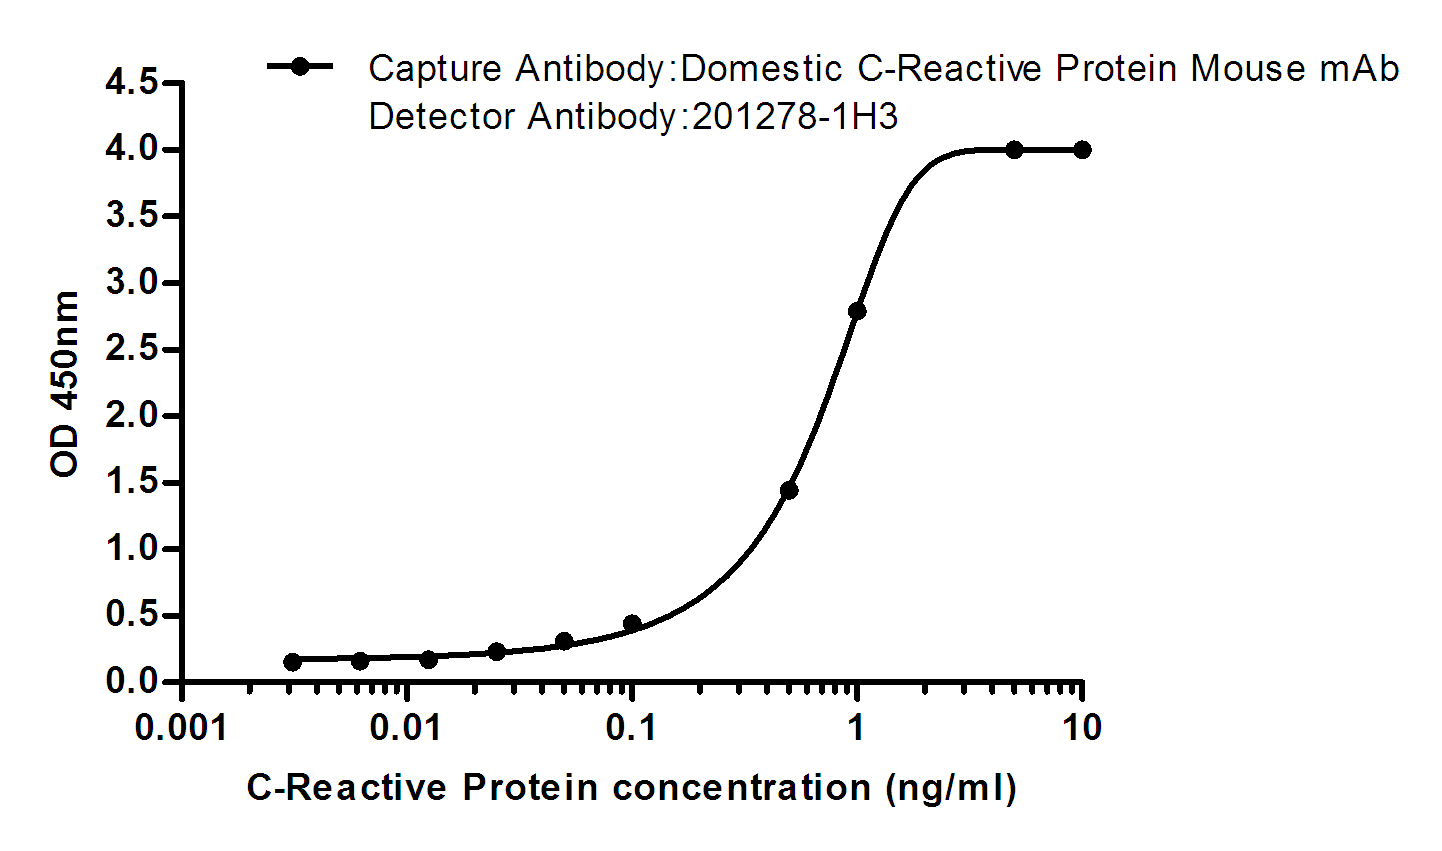 sELISA standard Curve for C-Reactive Protein: Capture Antibody Mouse mAb to C-Reactive Protein at 1ug/ml and 168074 was used for detecting.